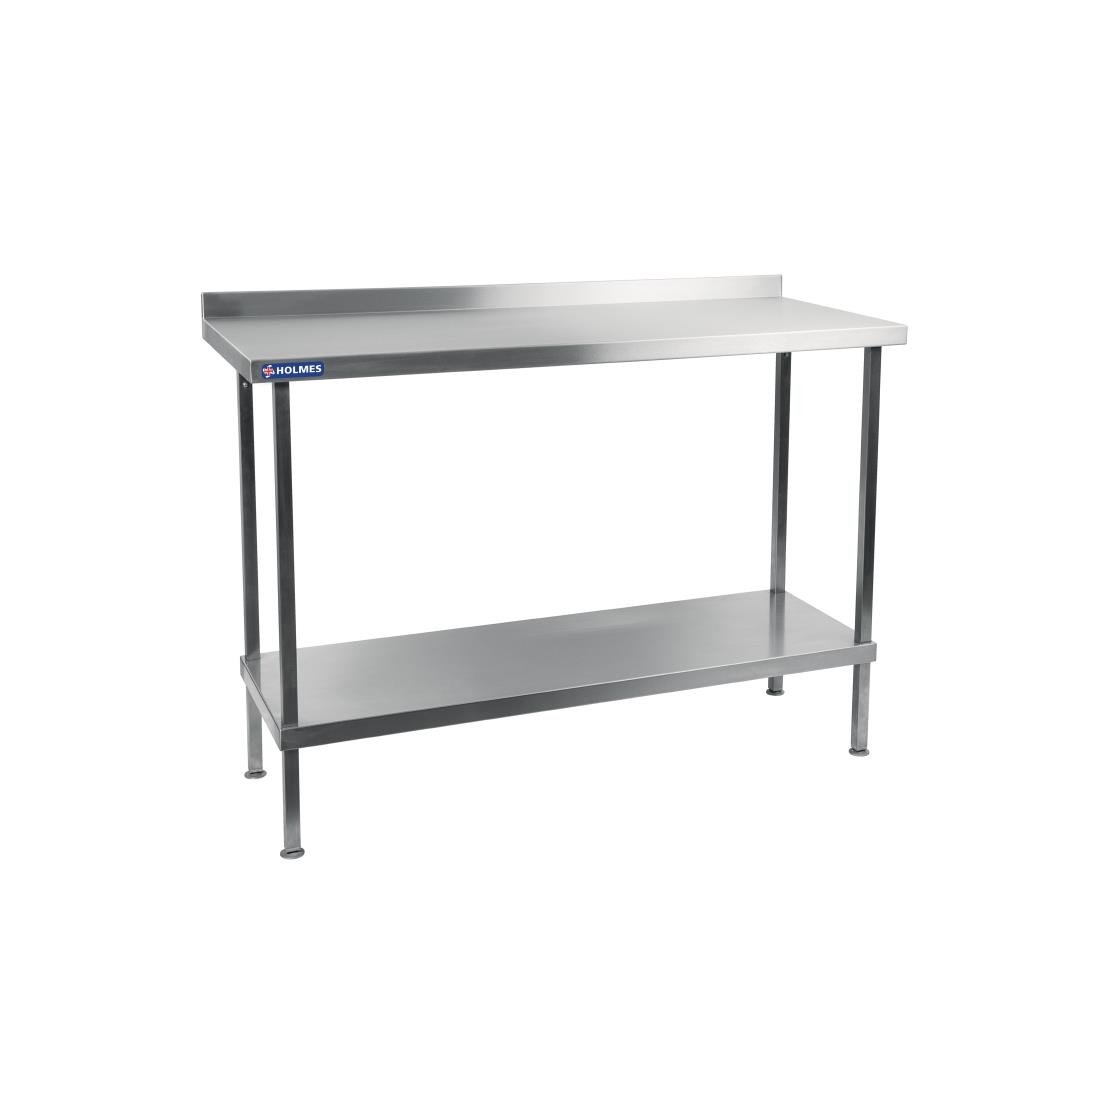 DR036 Holmes Stainless Steel Wall Table 1200mm JD Catering Equipment Solutions Ltd